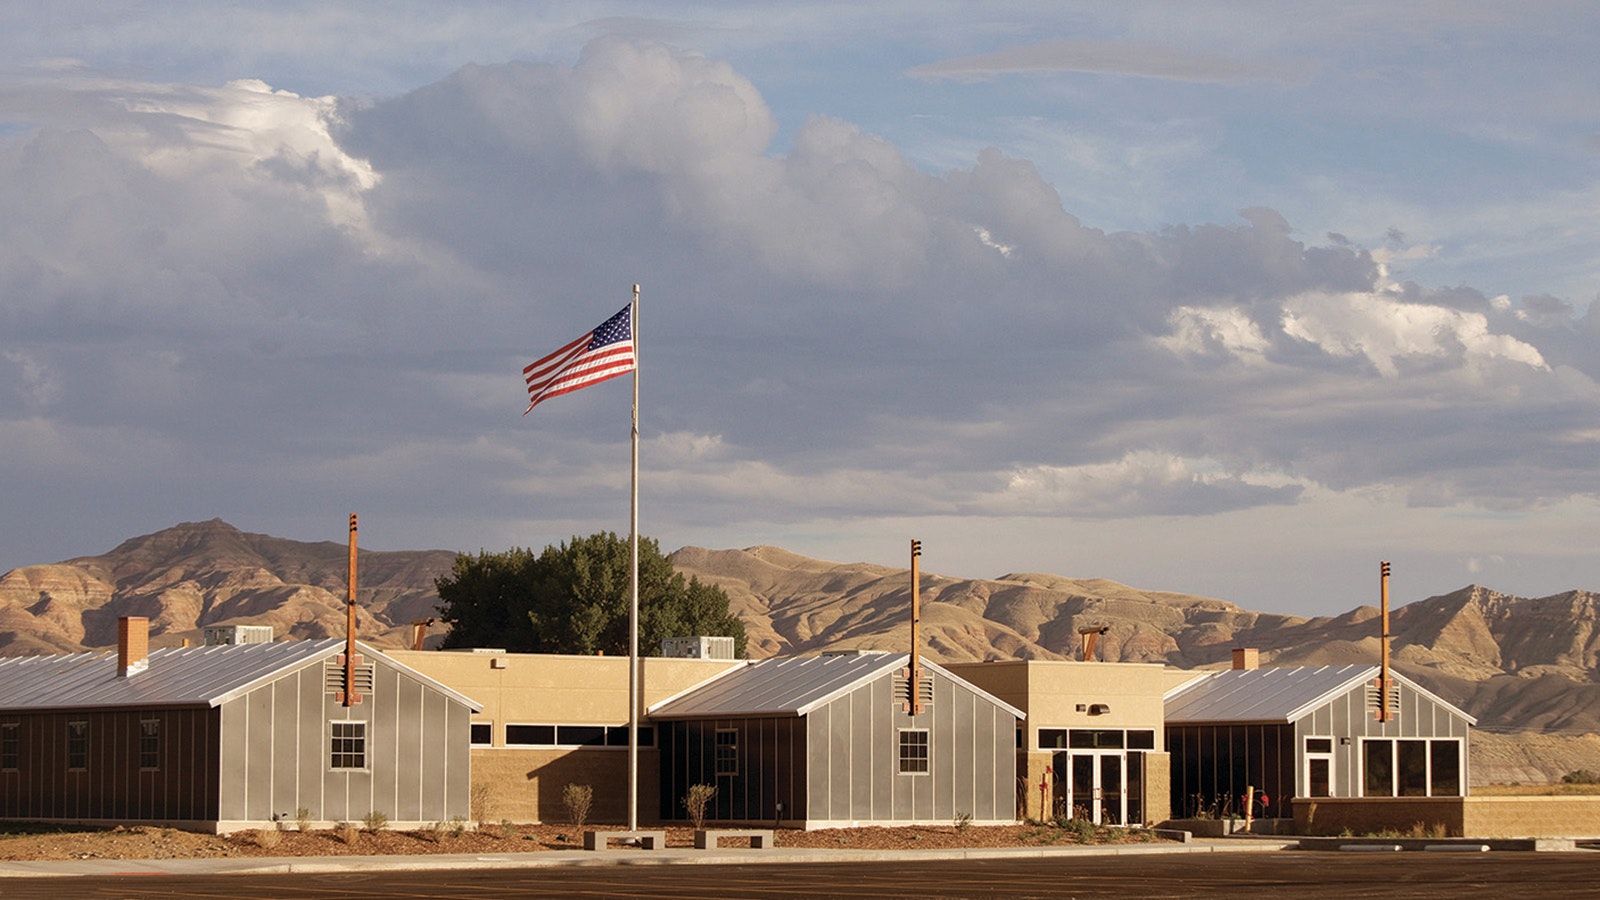 The Heart Mountain Institute is now as museum and interpretive center preserving the history of the Heart Mountain Relocation Center near Cody, Wyoming, during World War II.